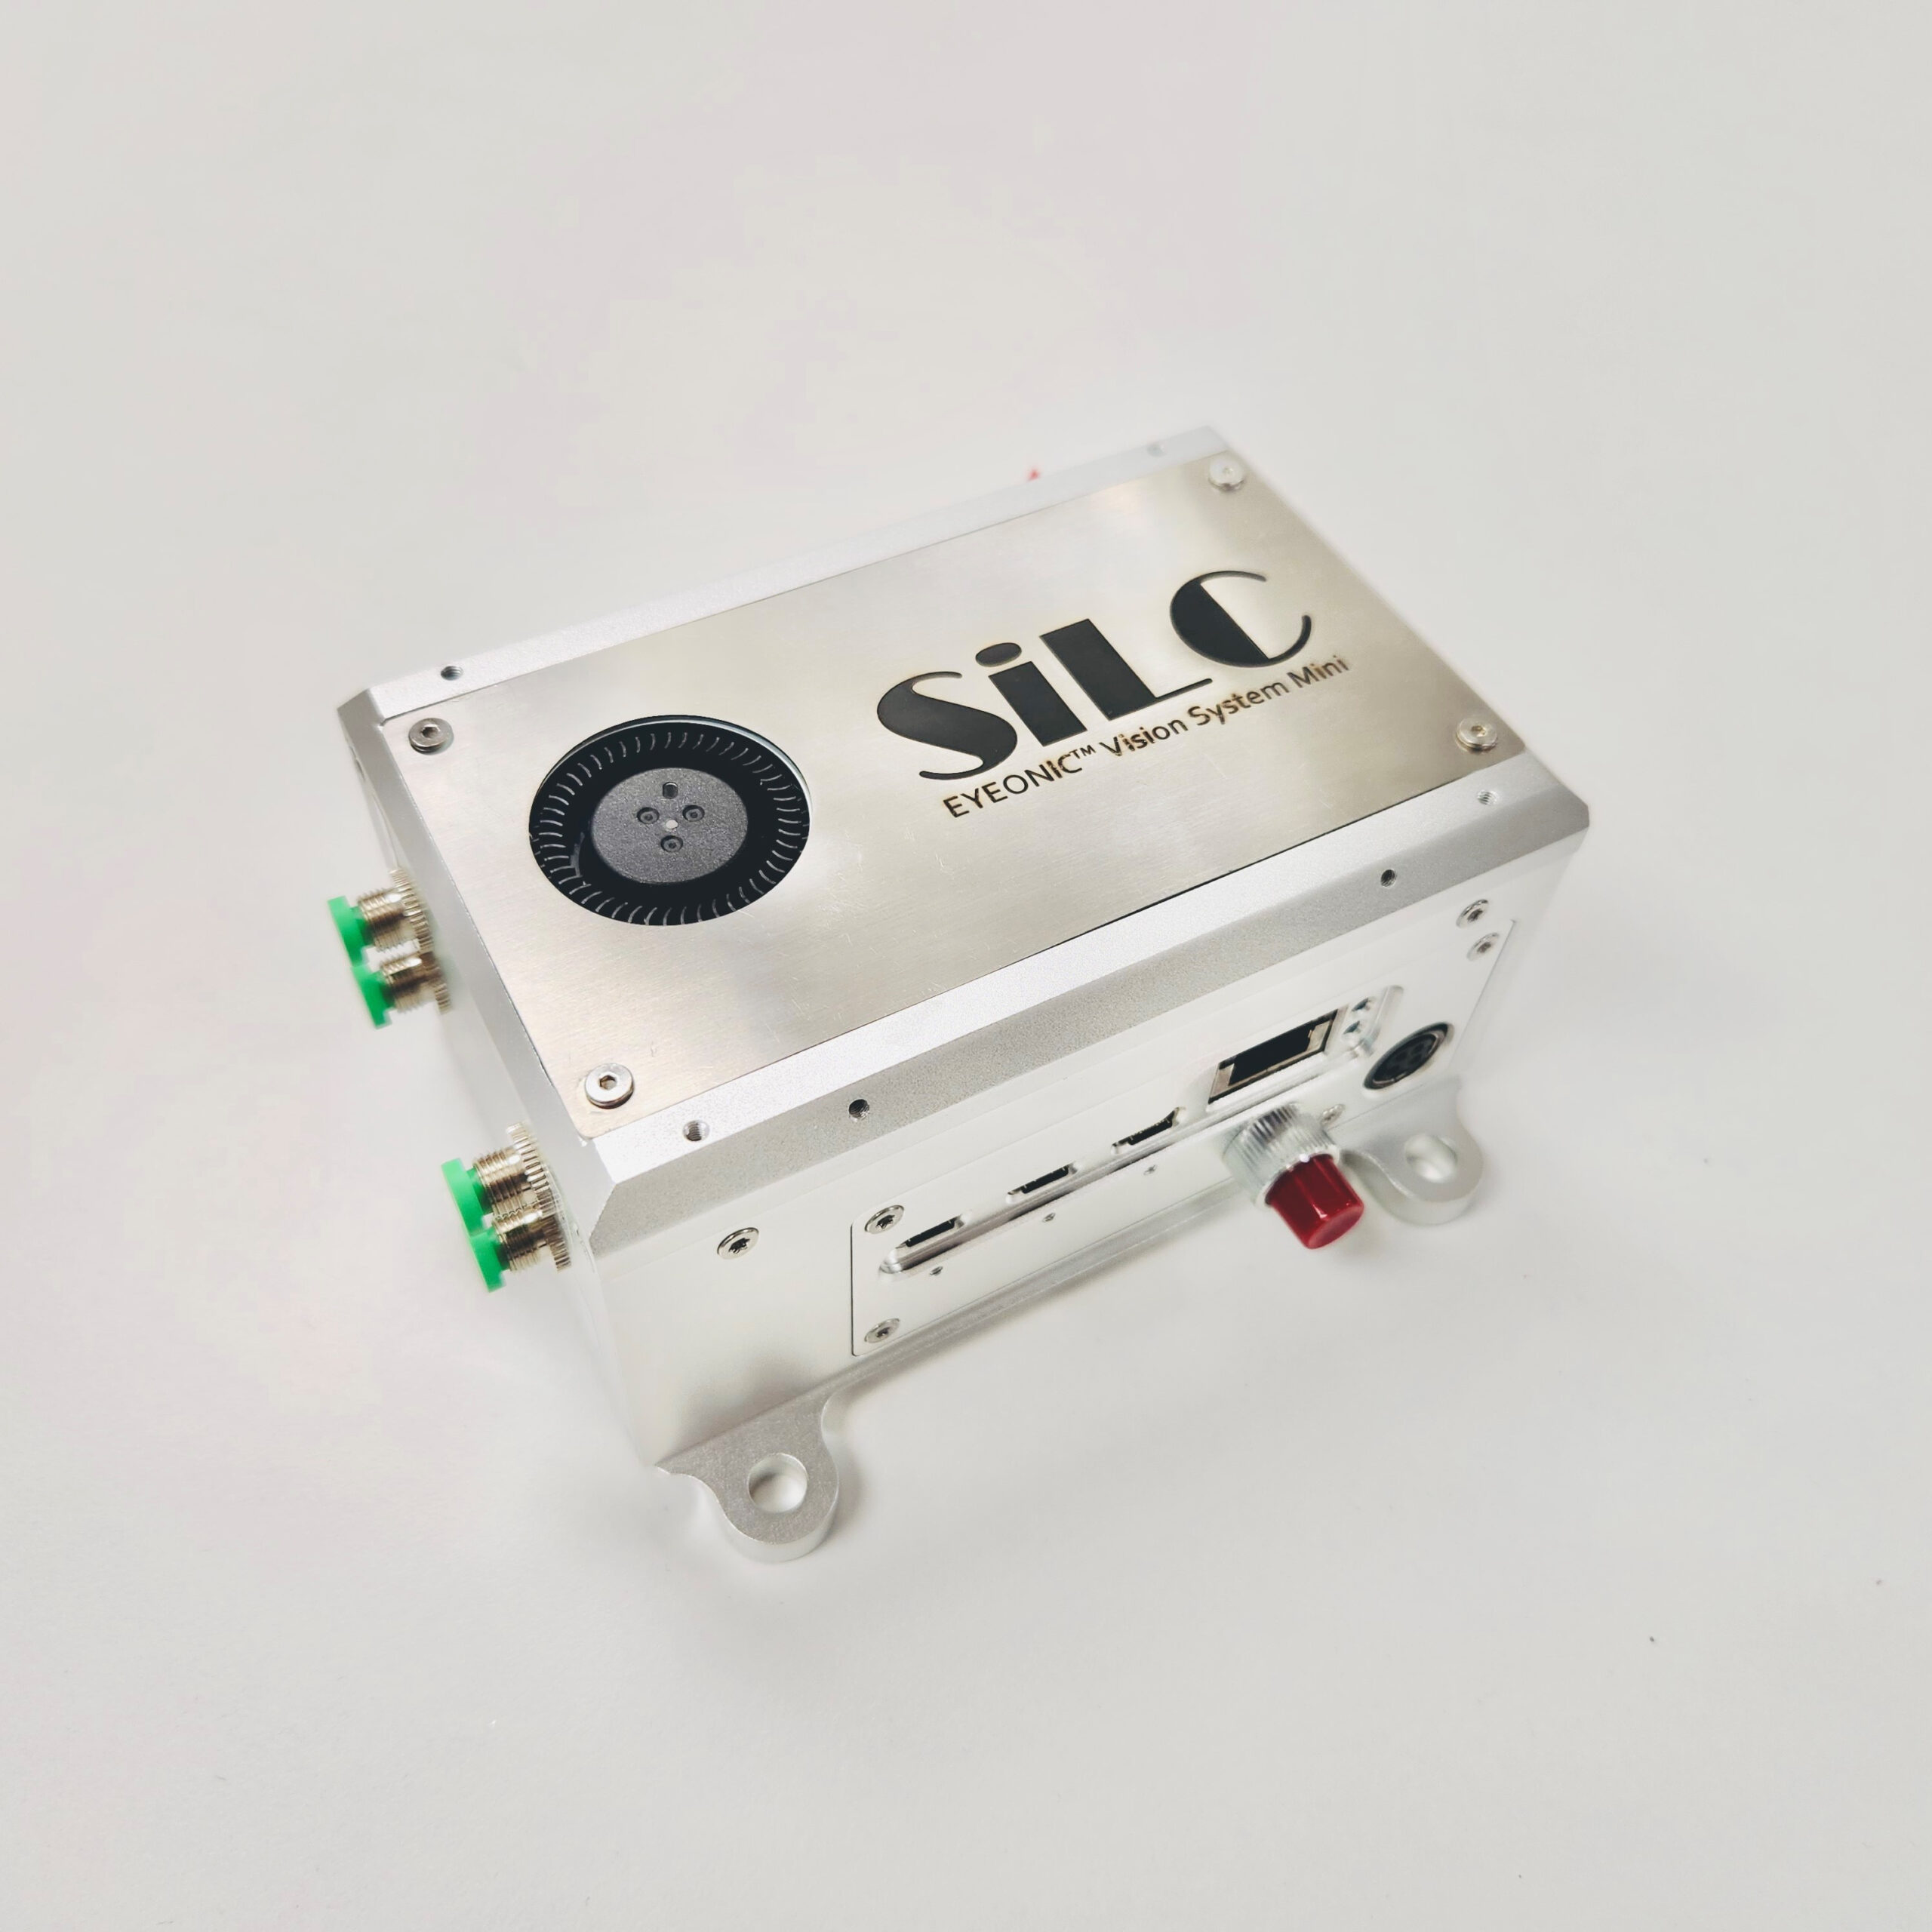 SiLC Technologies Introduces Eyeonic Vision System Mini, Advancing Precision LiDAR Technology